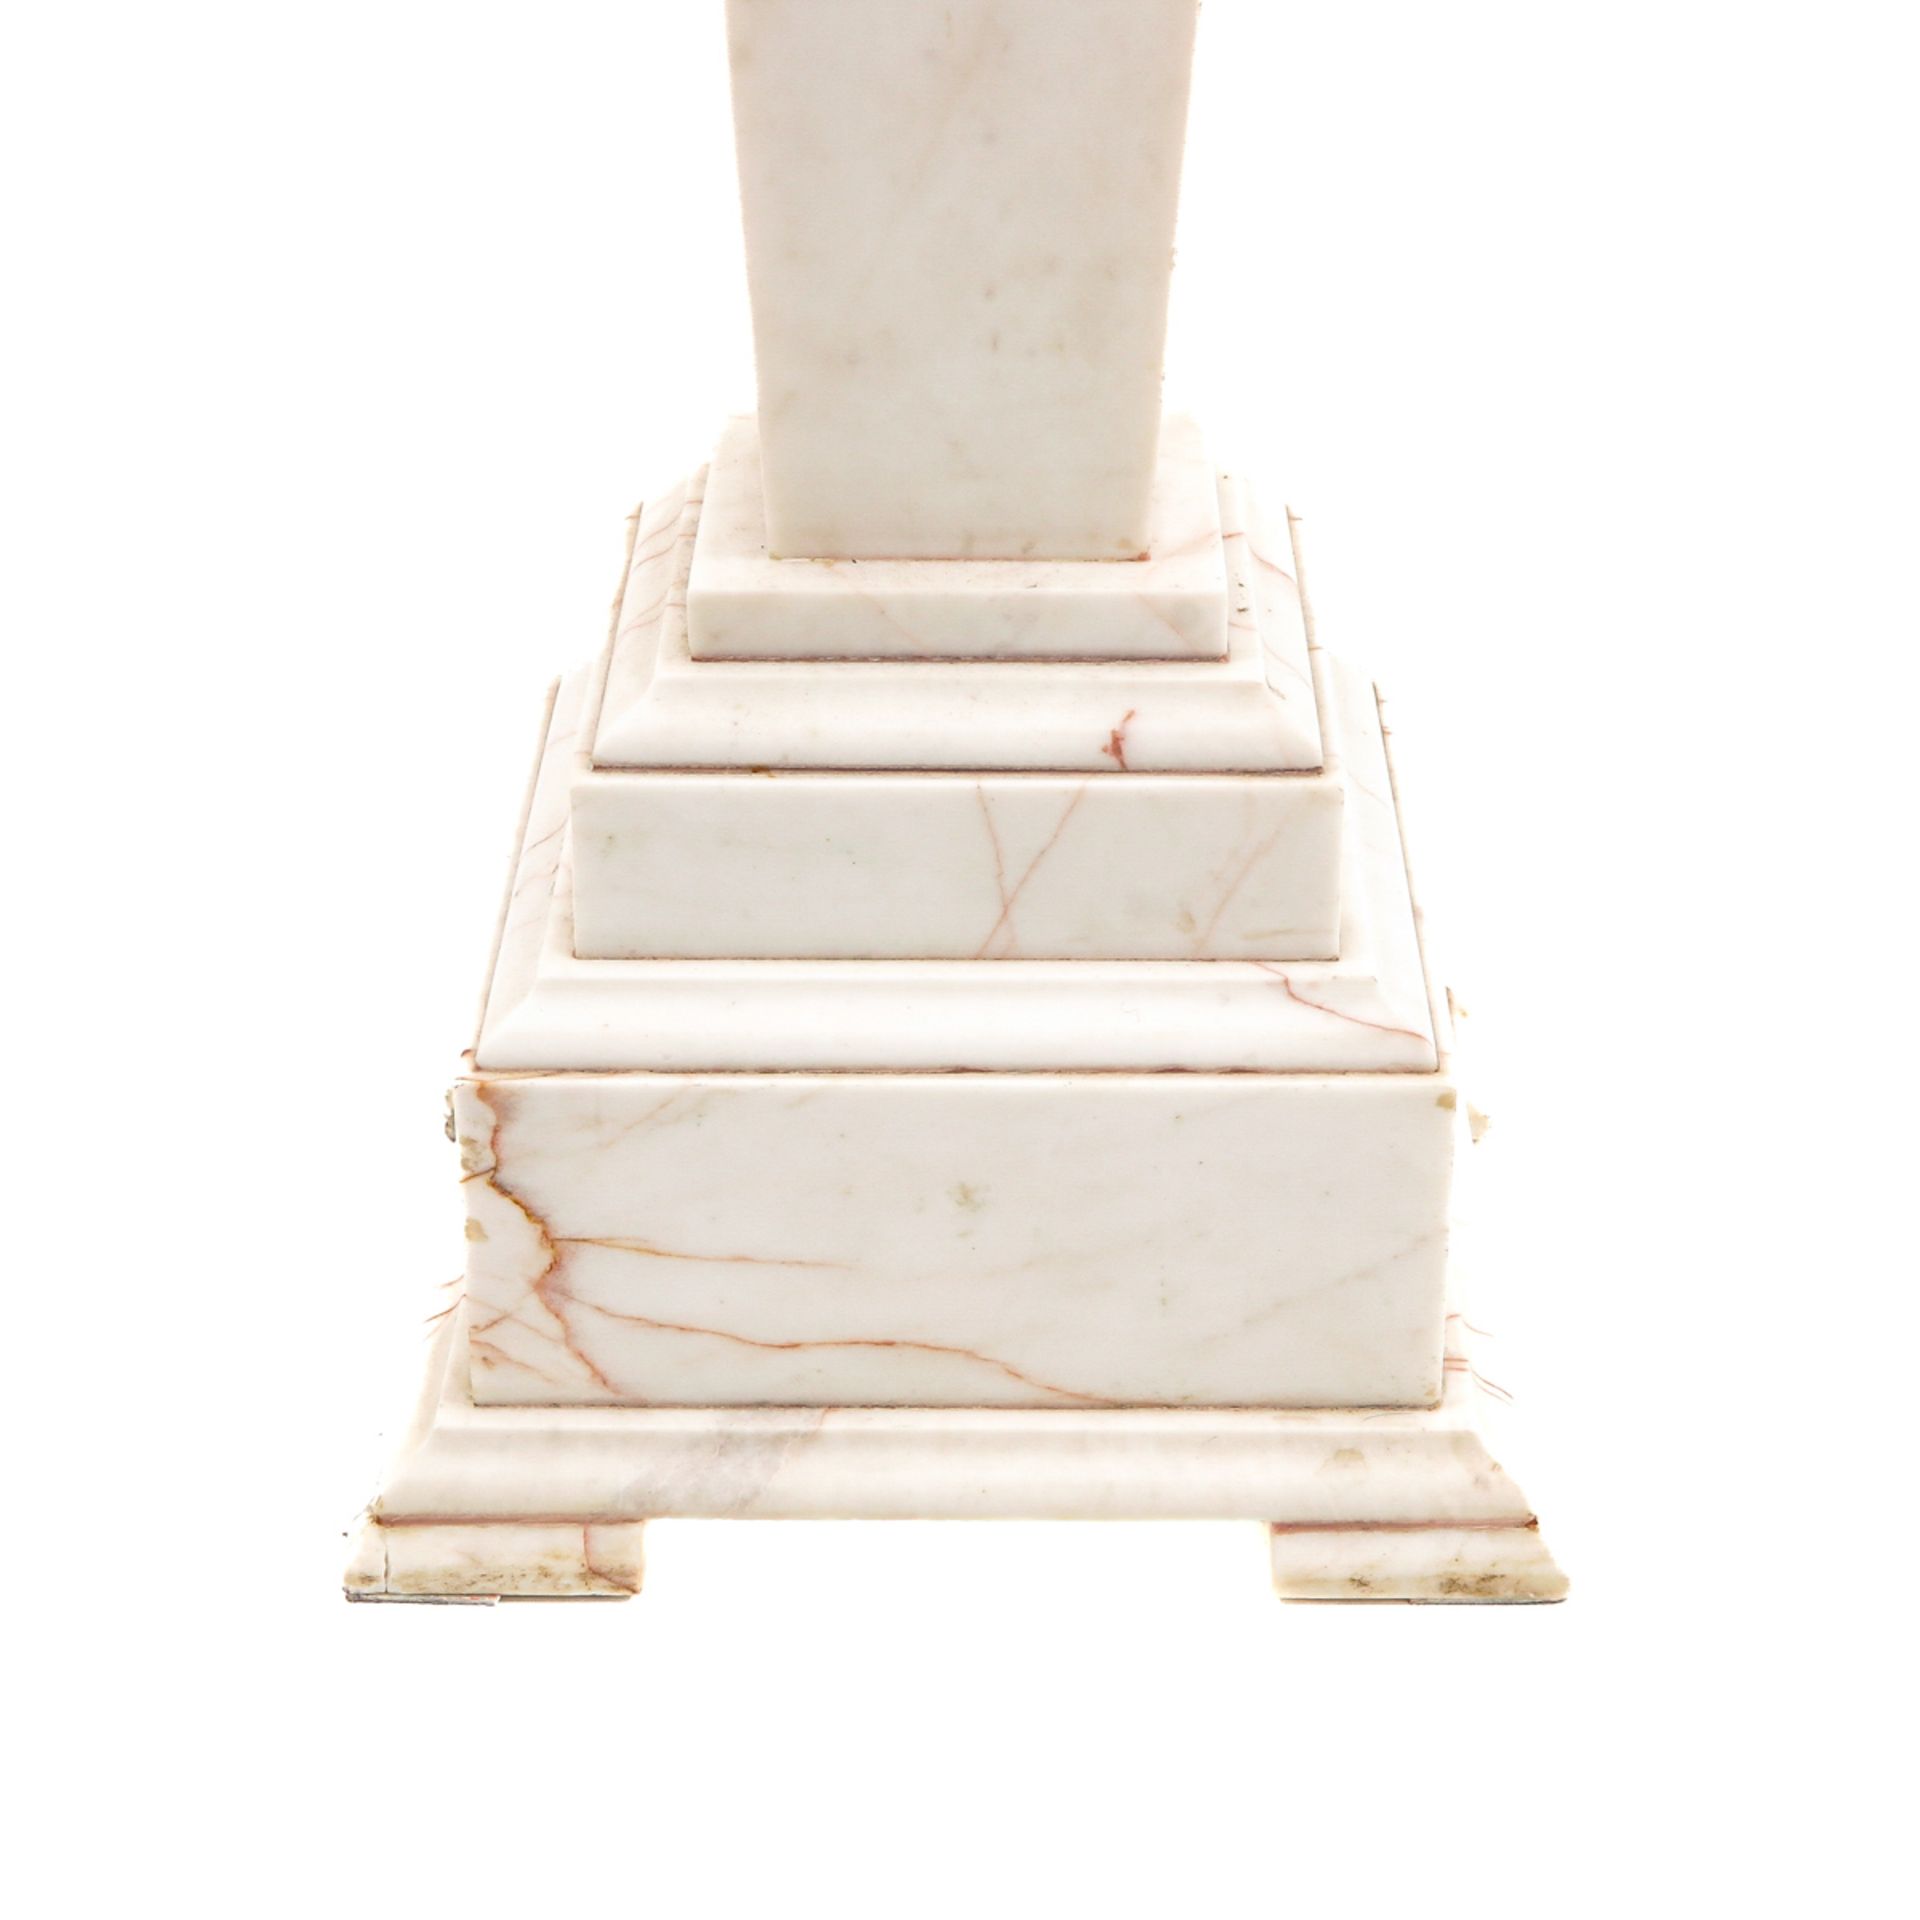 A Marble Pedestal - Image 8 of 8